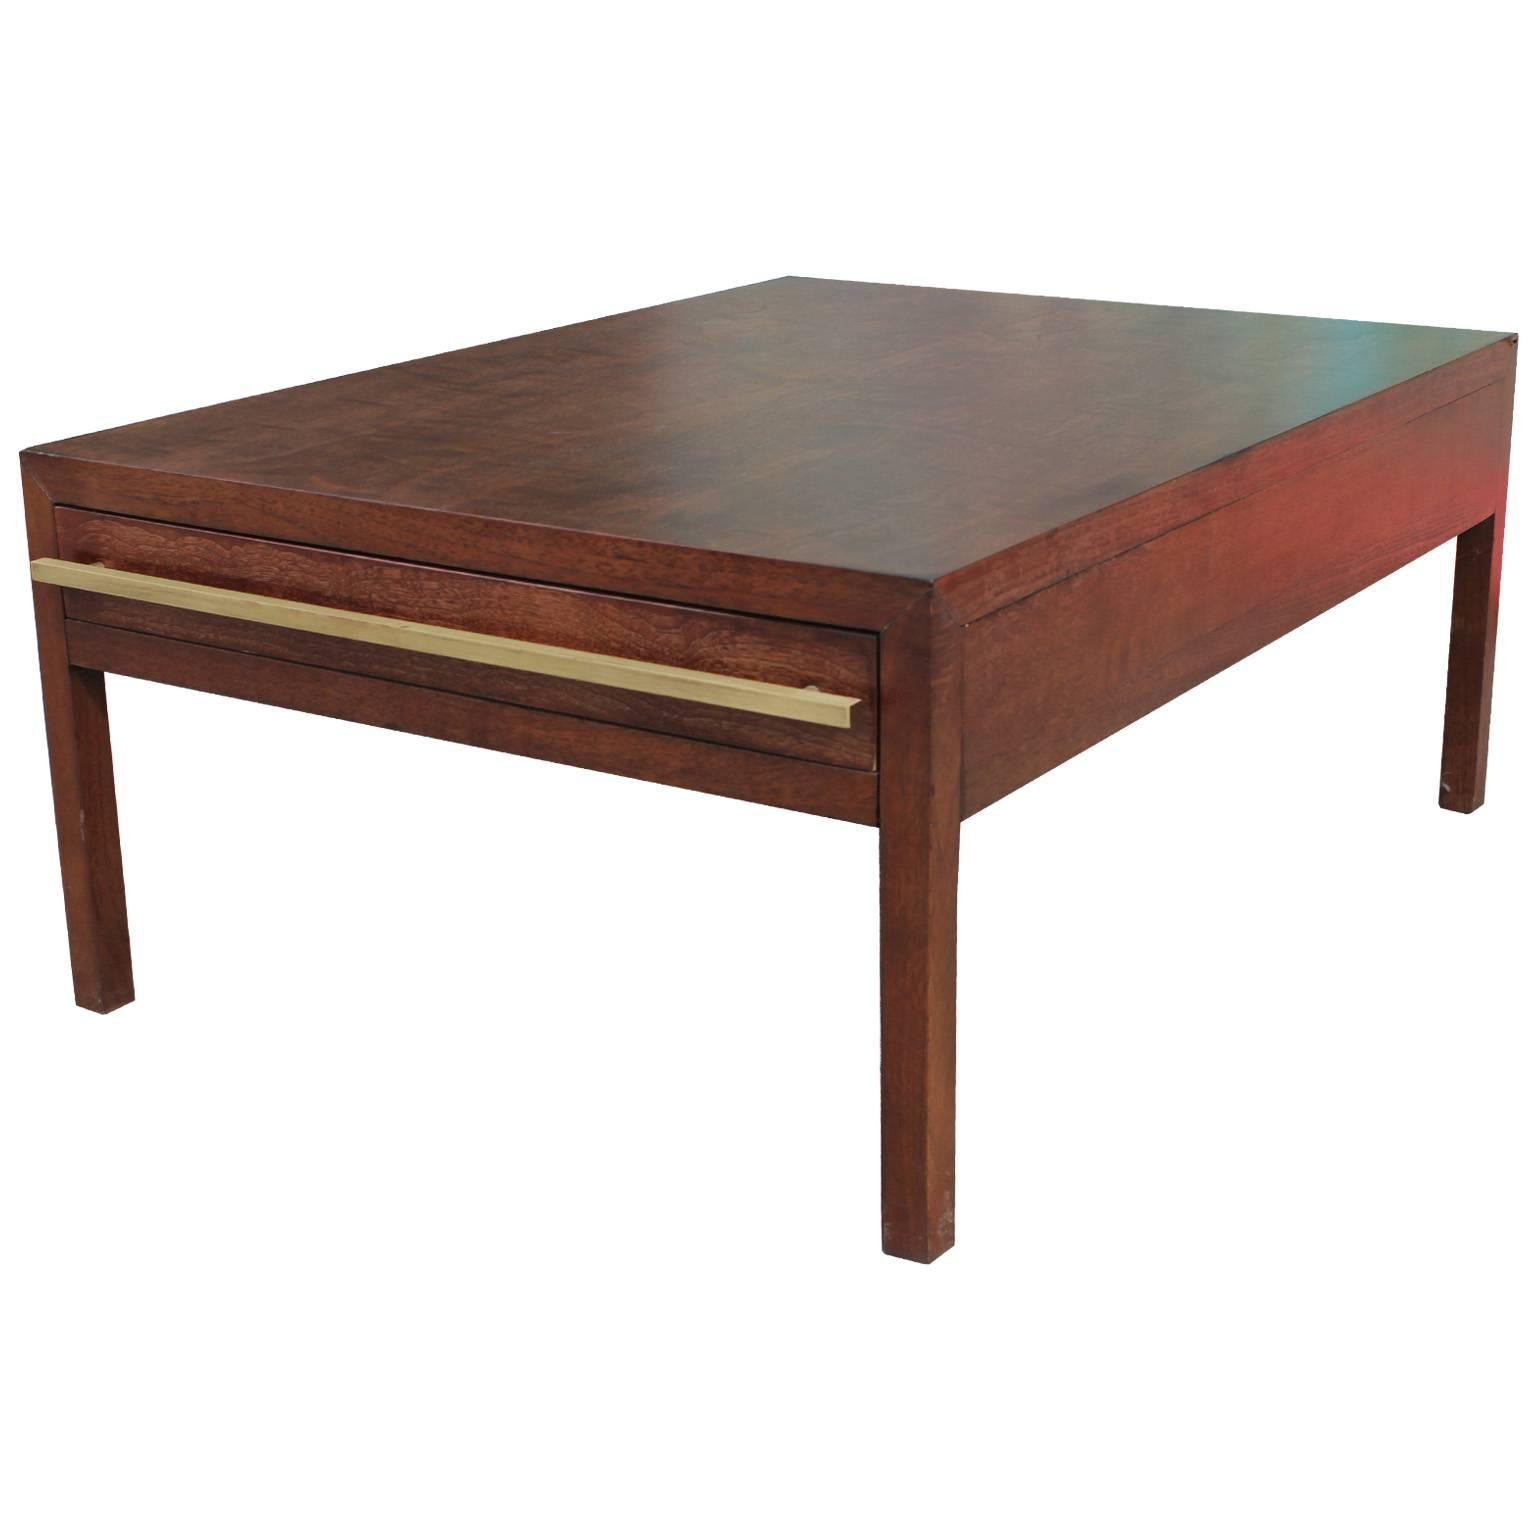 American Elegant Table by Michael Taylor for Baker with Brass Hardware